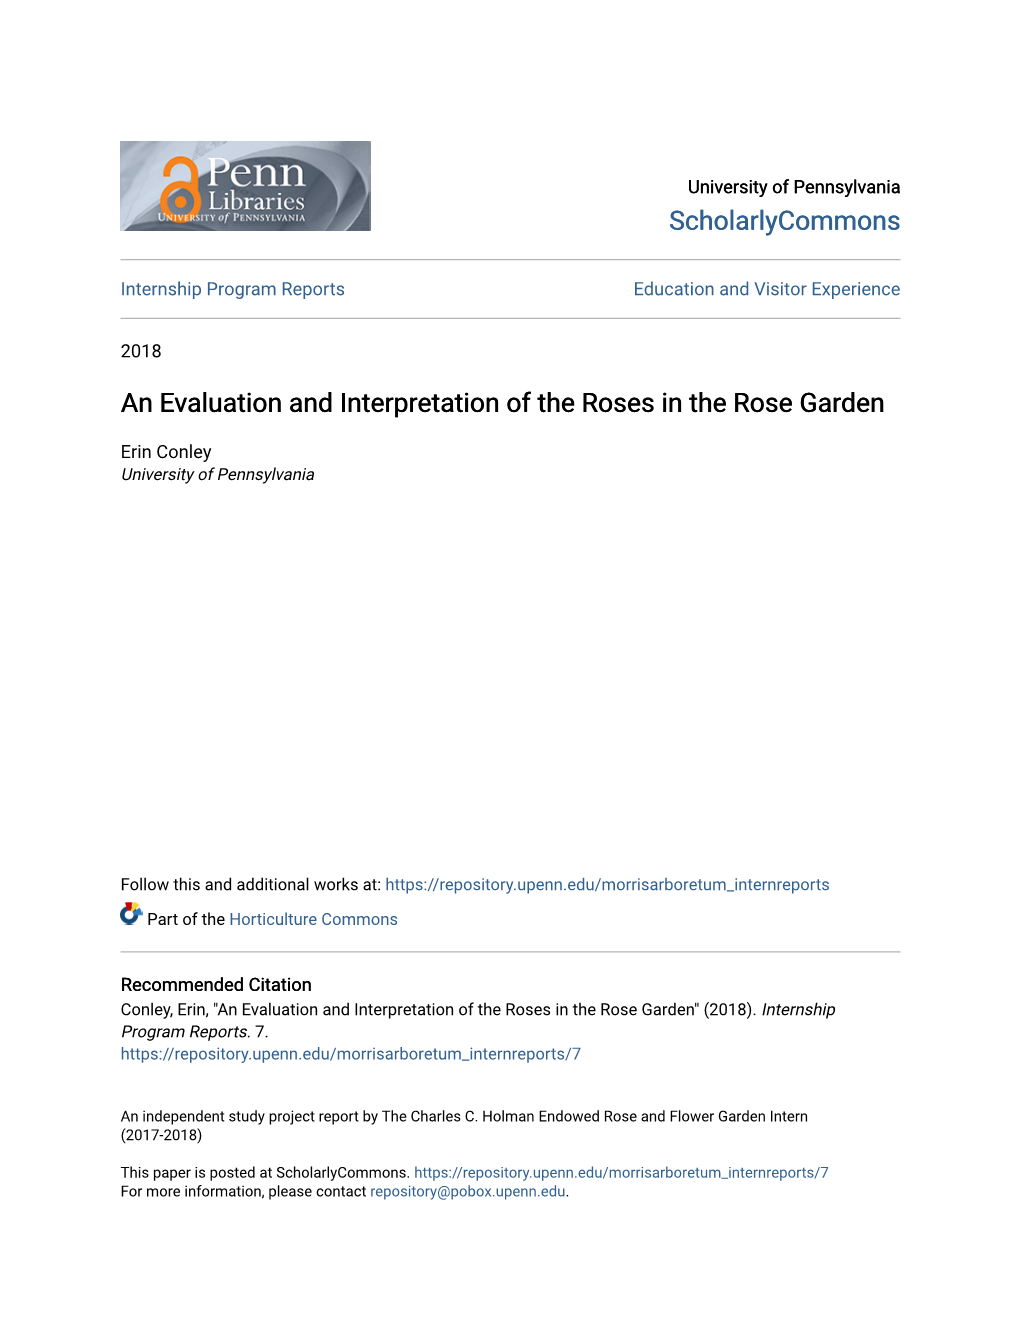 An Evaluation and Interpretation of the Roses in the Rose Garden